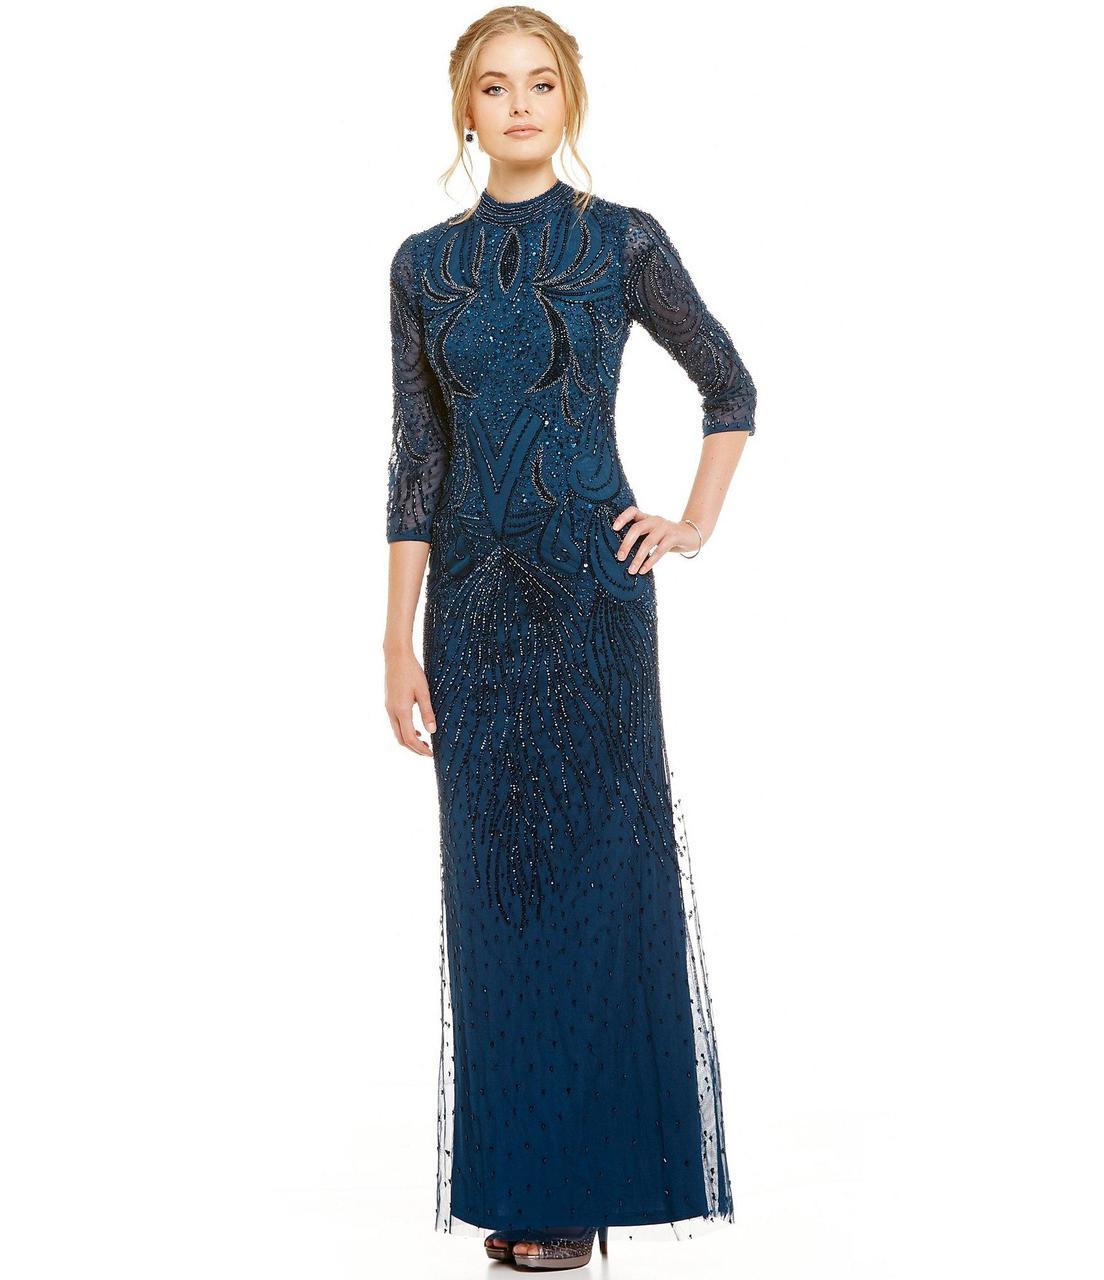  Adrianna Papell-Special Occasion Dress-COLOR-Deep Blue